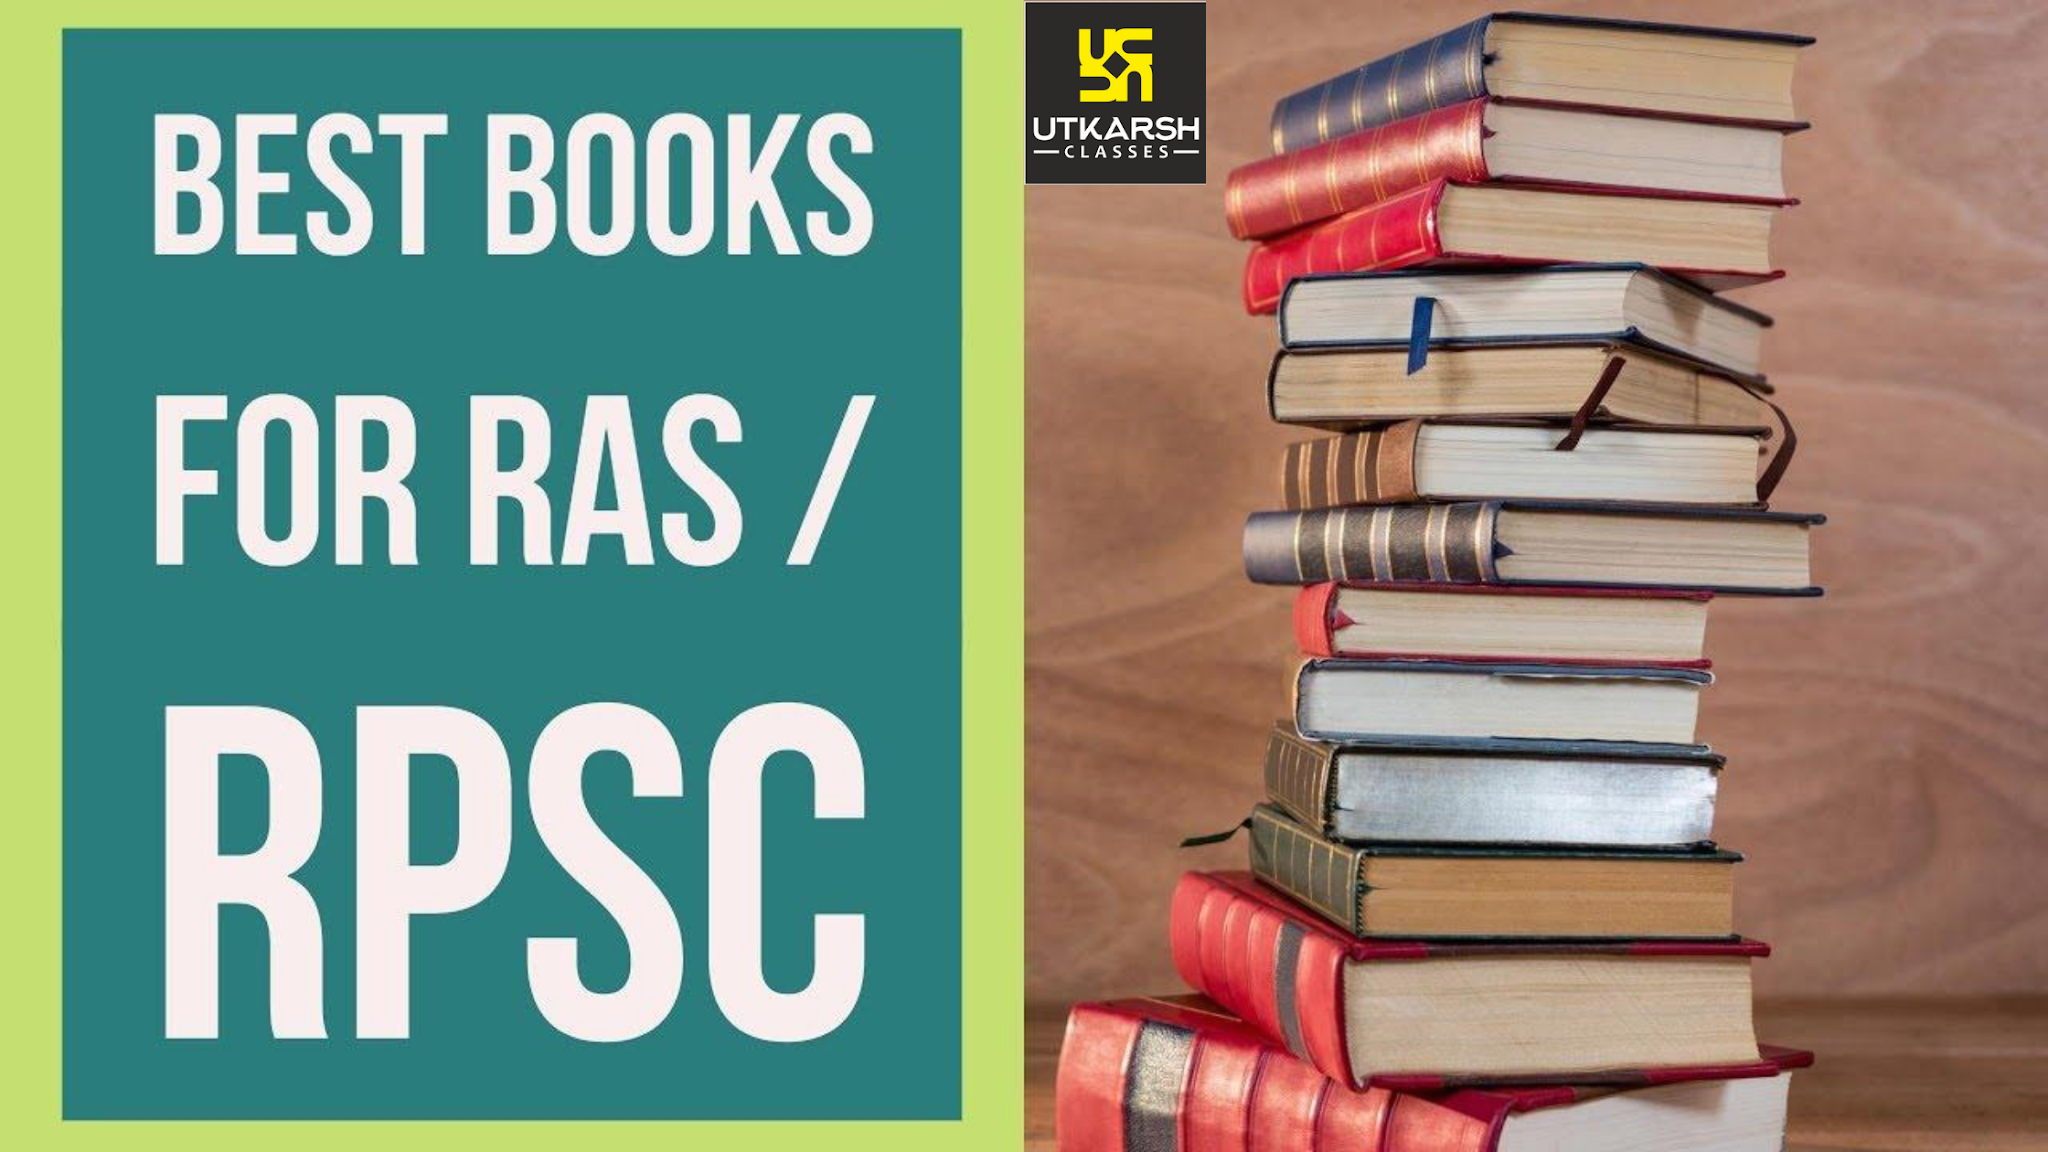 Subject wise book list for RAS Prelims and Mains